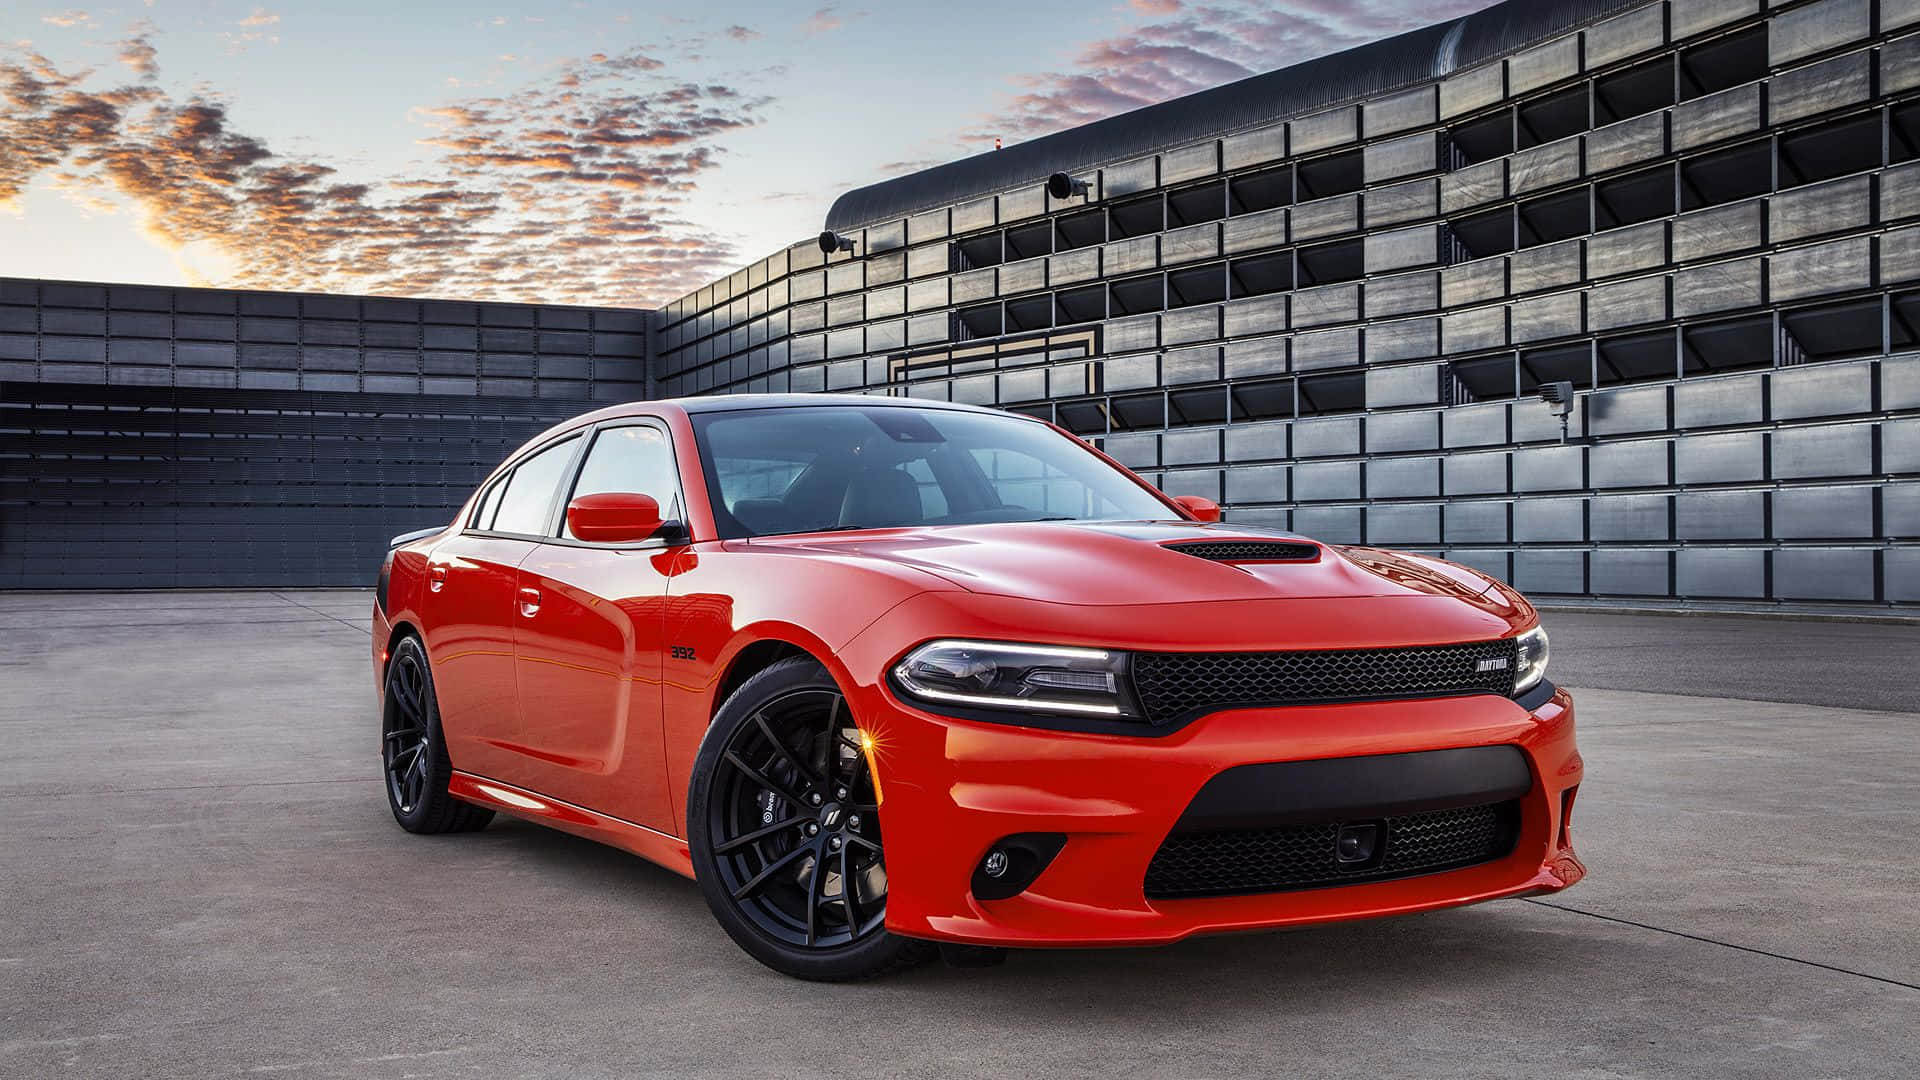 Stunning Dodge Charger in Action Wallpaper